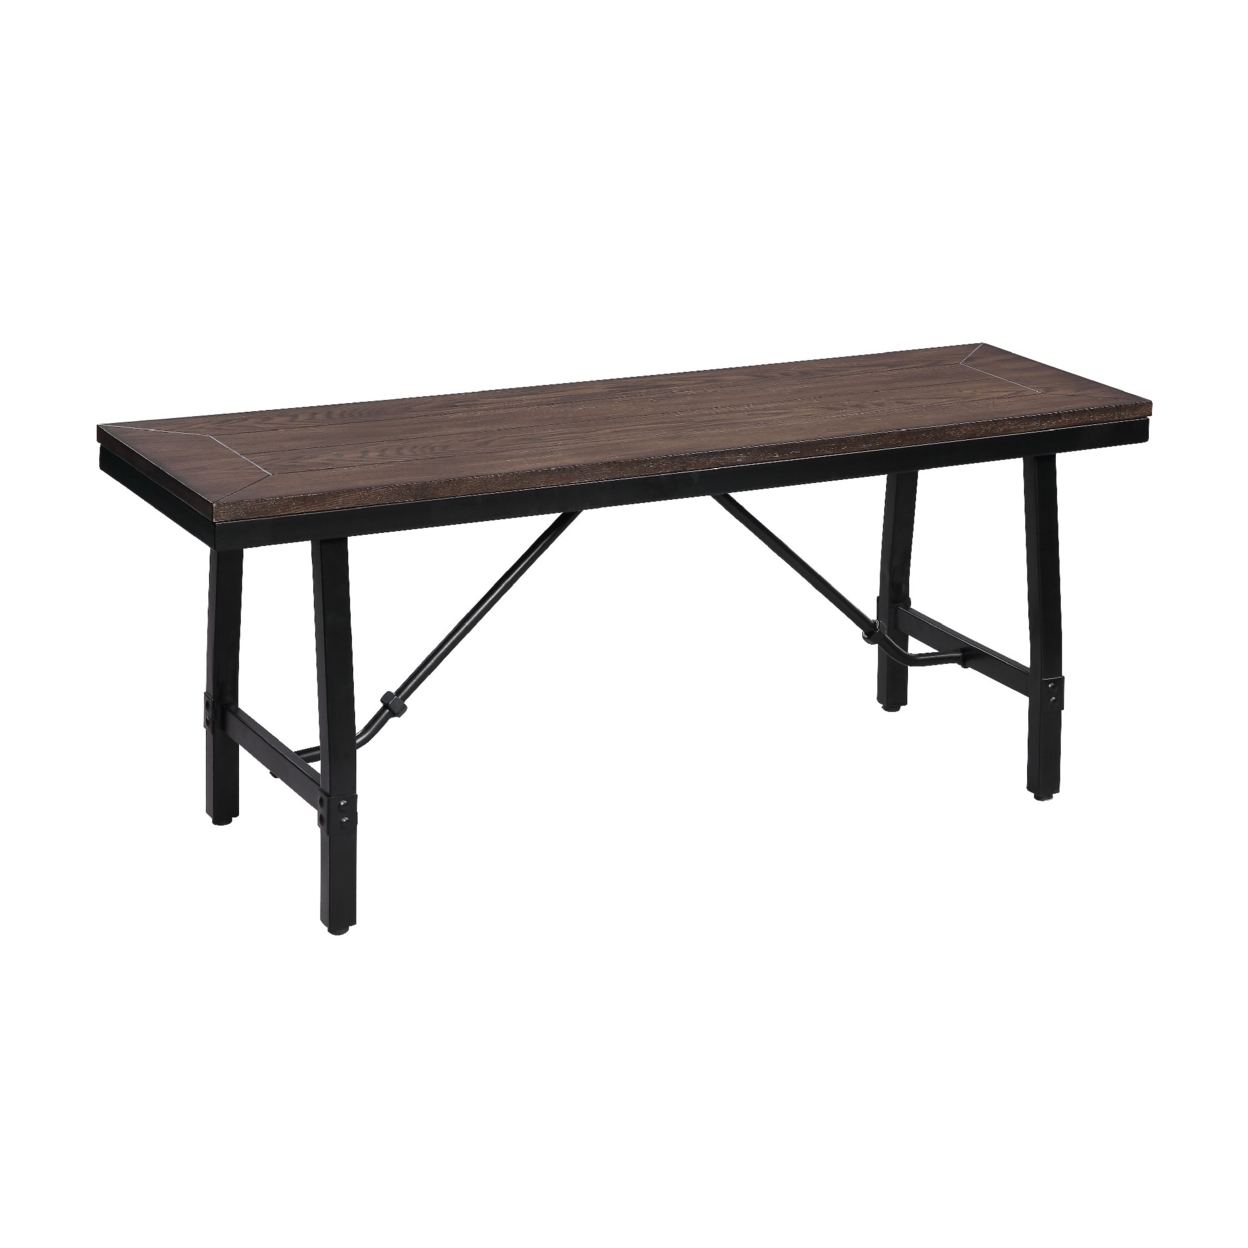 Industrial Wood And Metal Bench With Tube Leg Support, Brown And Black- Saltoro Sherpi